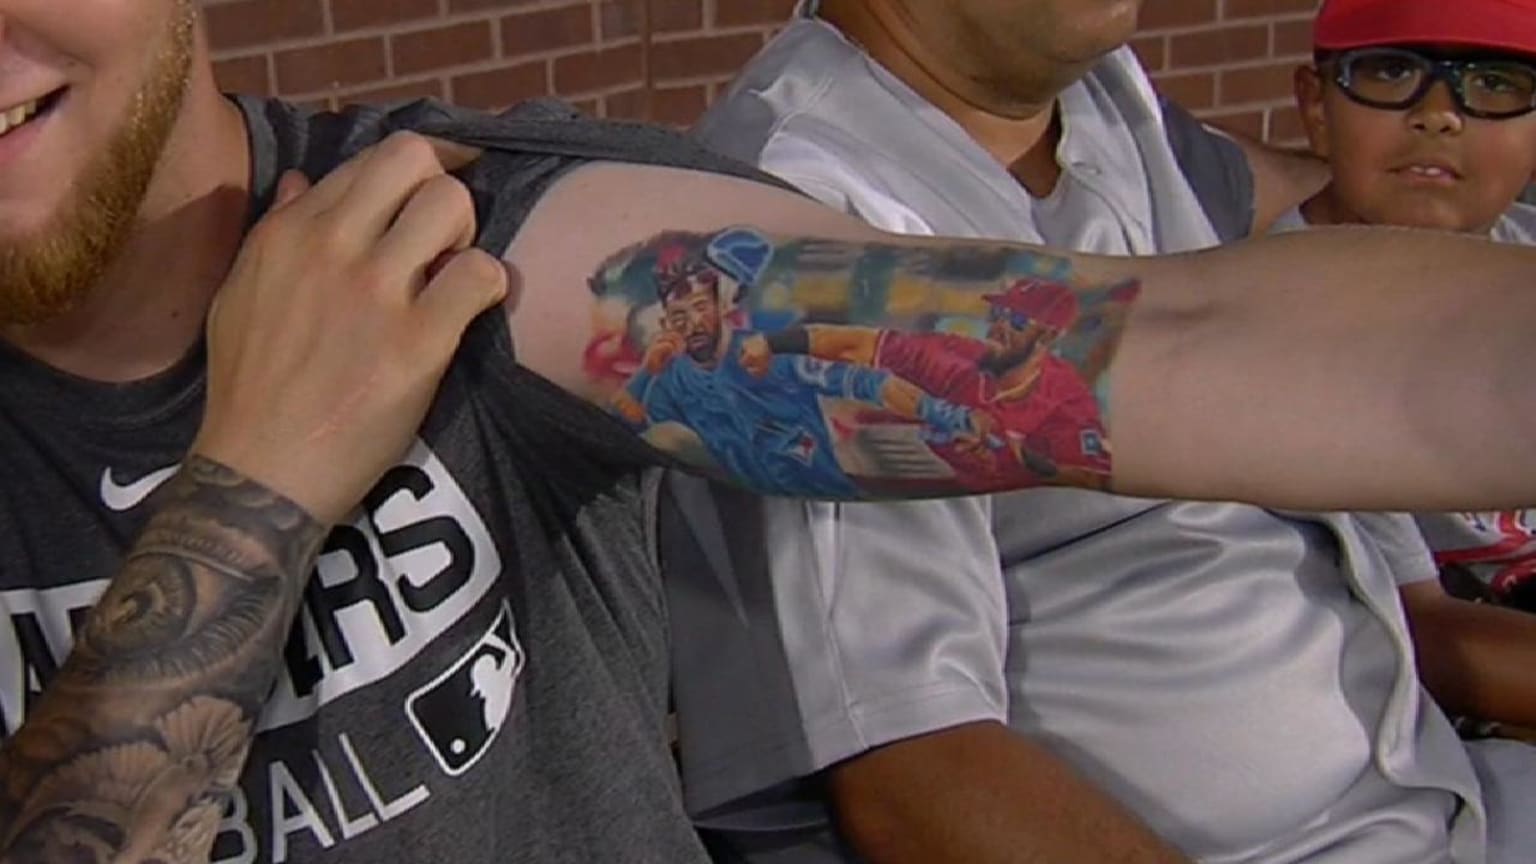 Video: The meaning behind Cardinal player tattoos